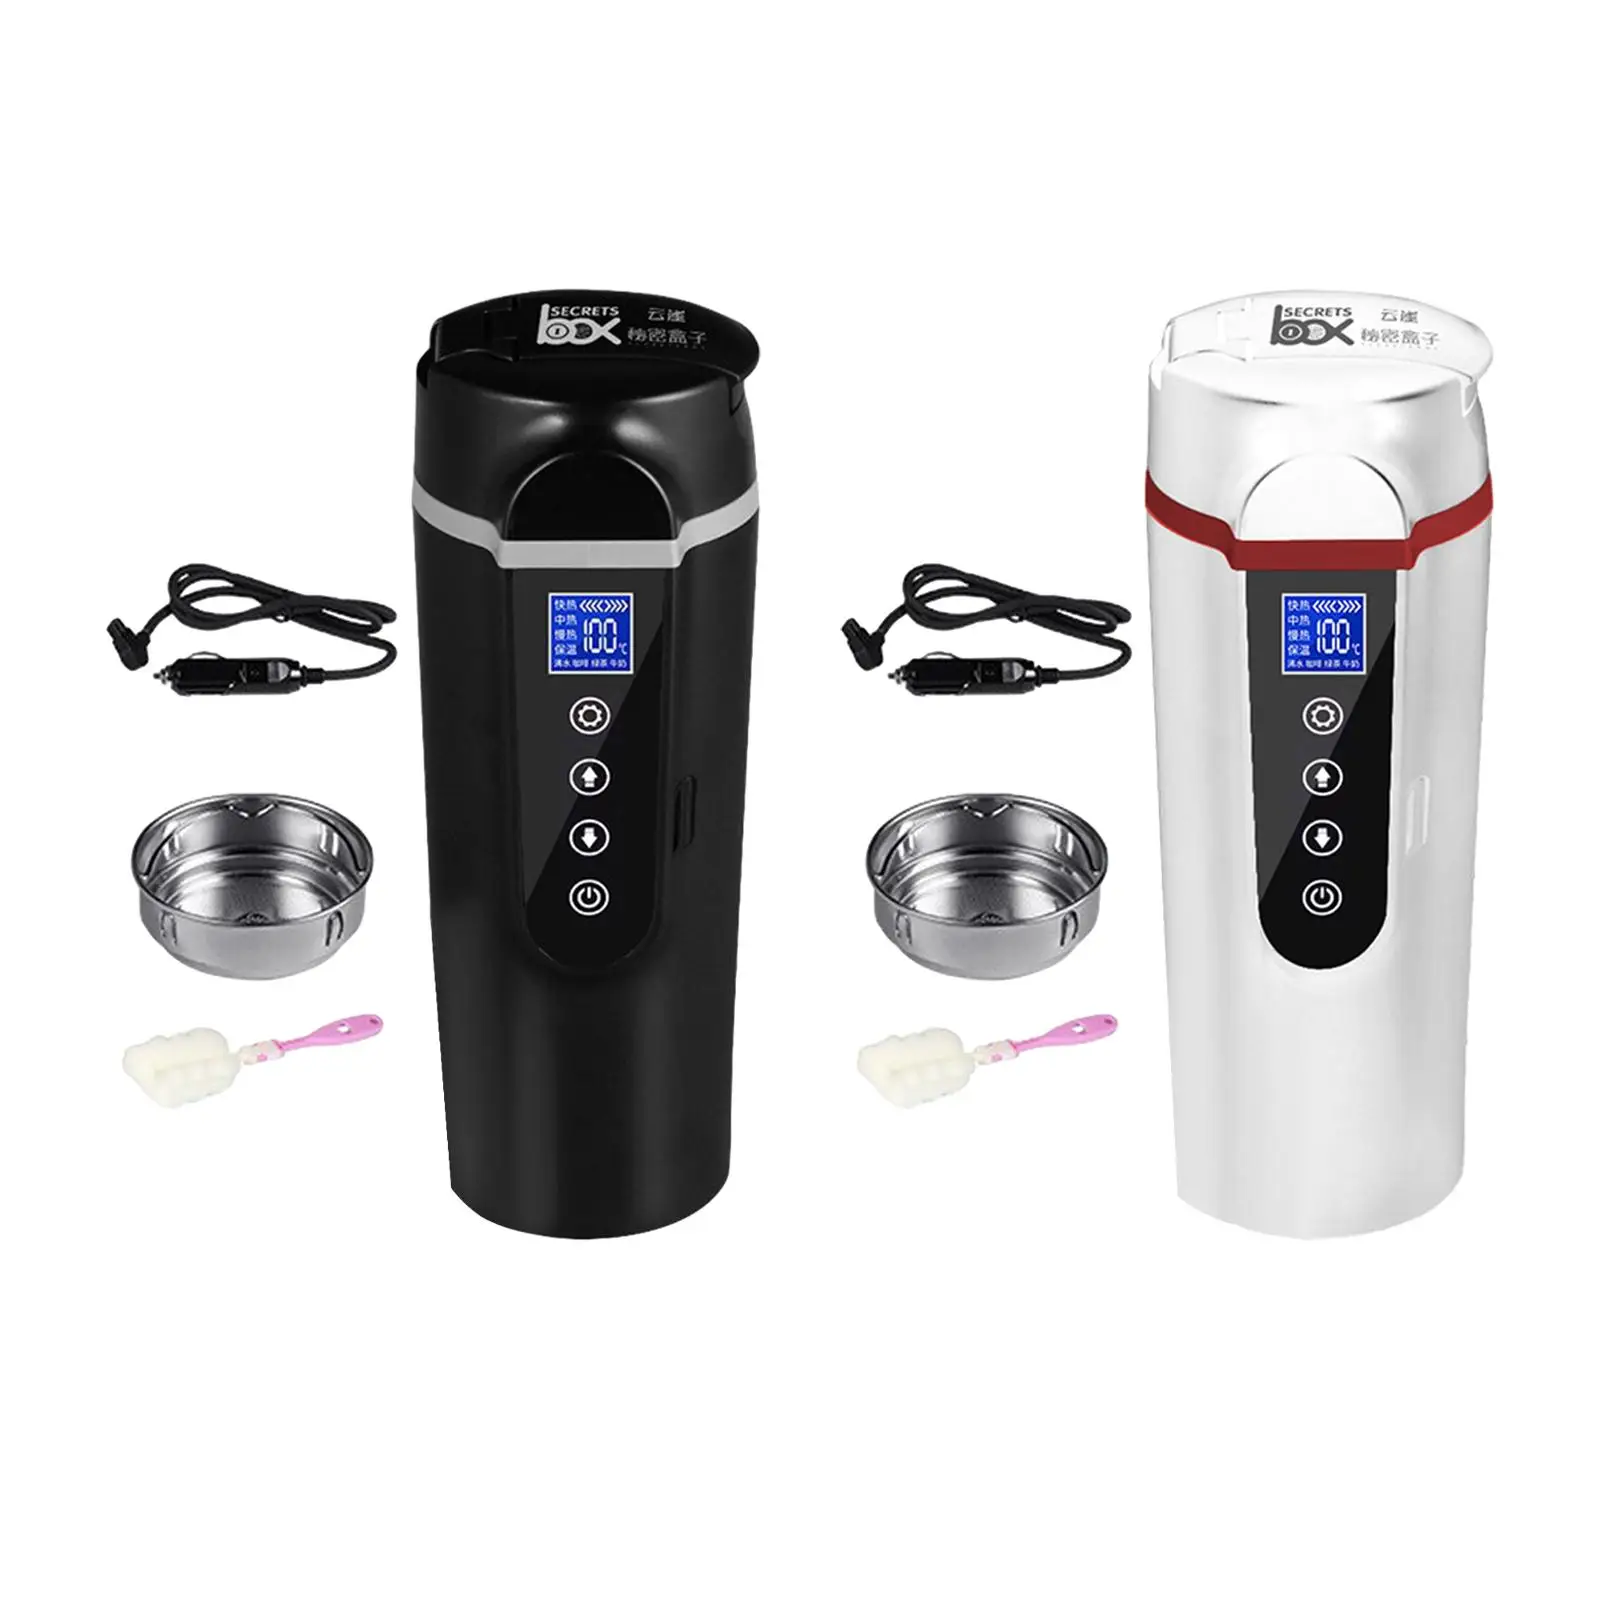 Car Heating Cup Travel Coffee Mugs Warmer for Auto Car Airplane Camping